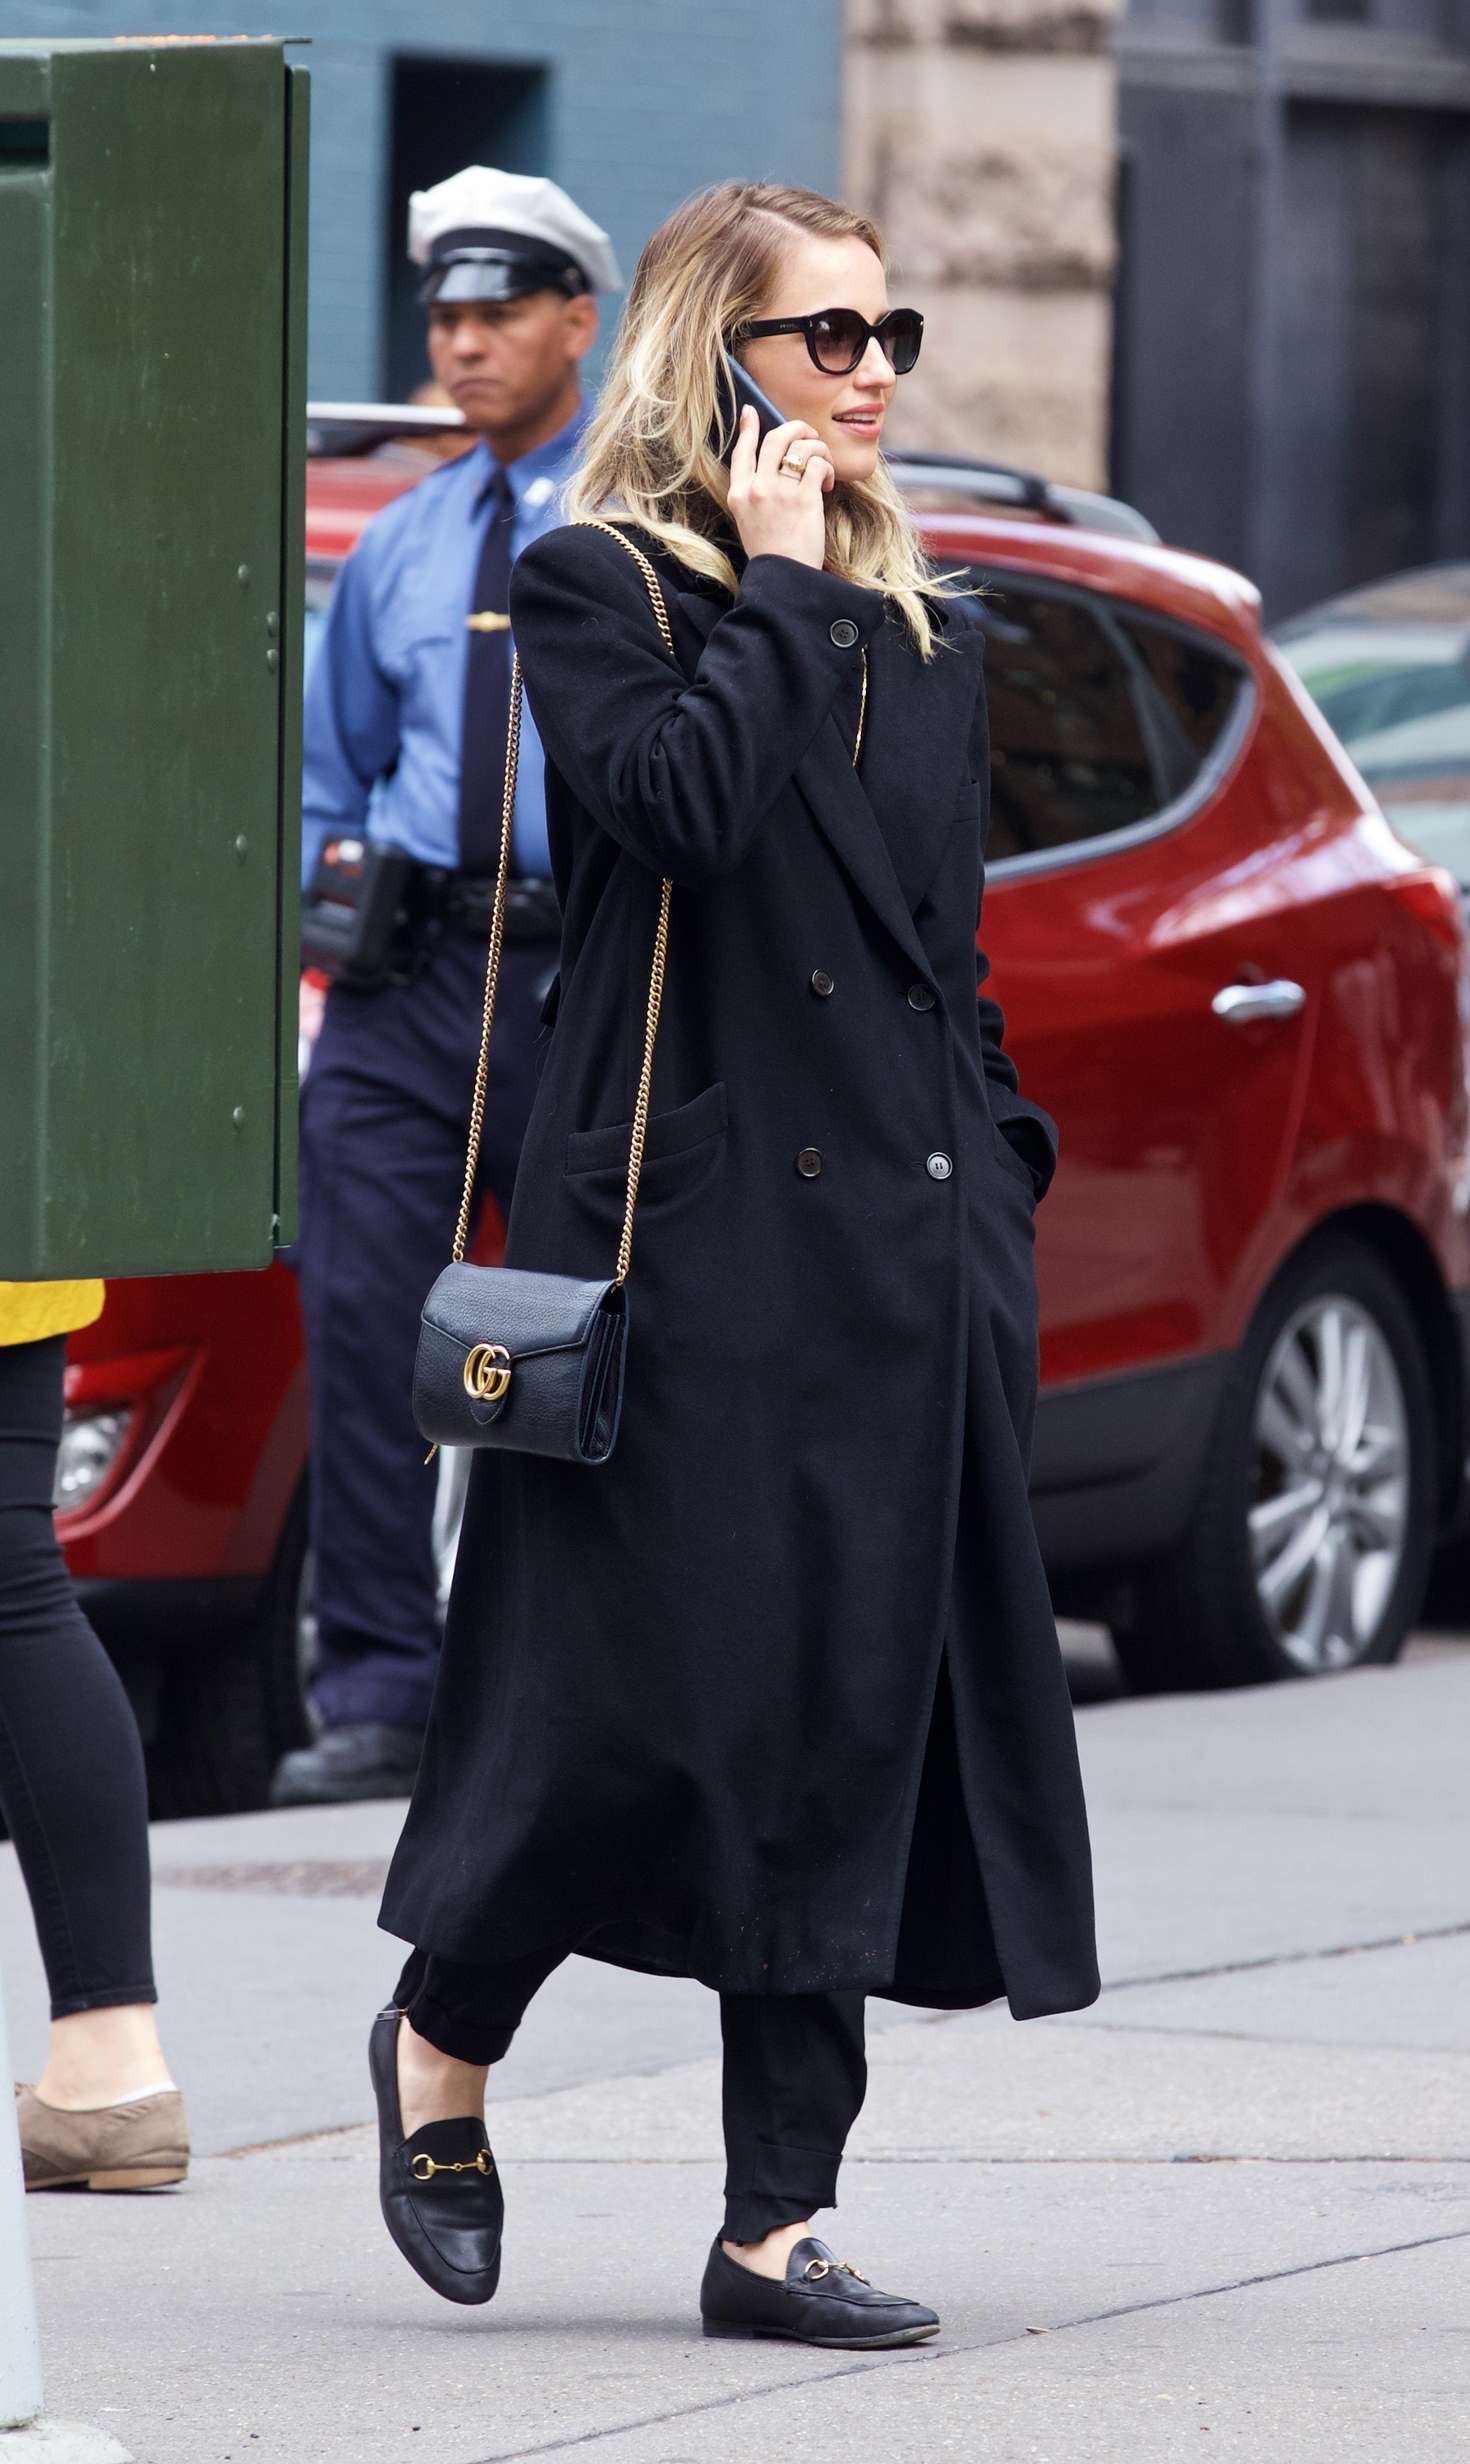 Dianna Agron in Long Coat Out in Soho | GotCeleb